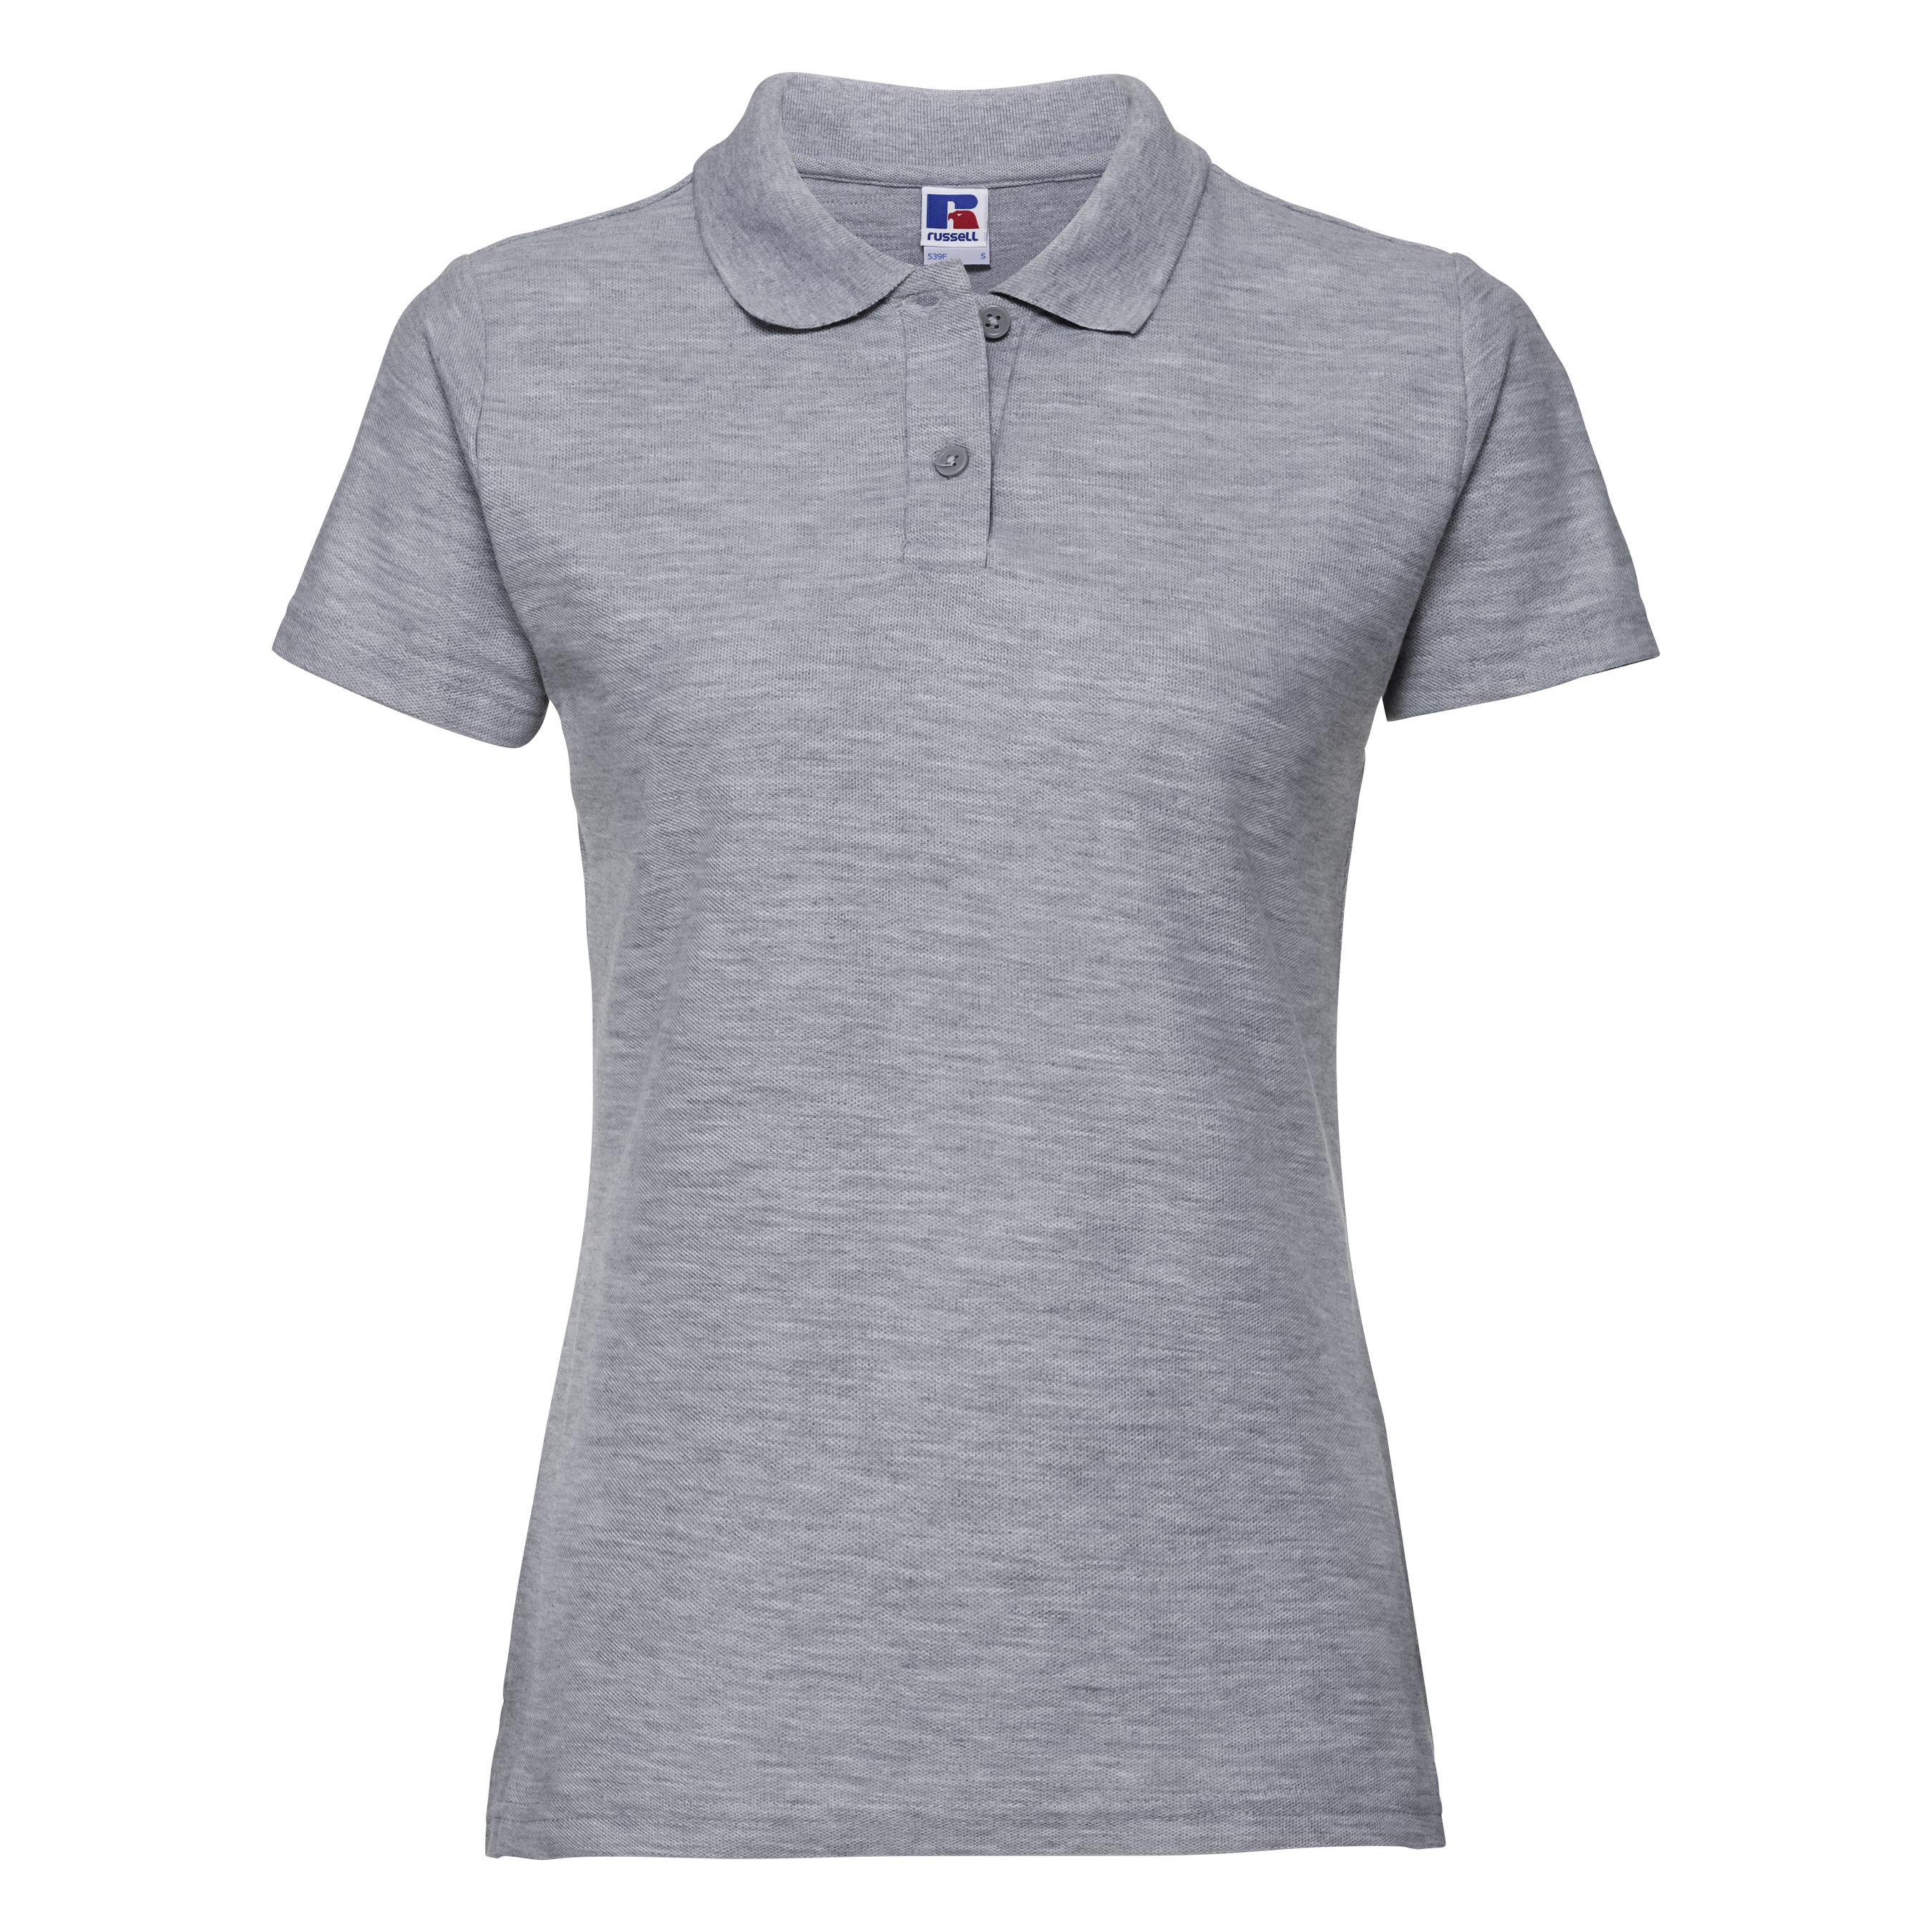 ax-httpswebsystems.s3.amazonaws.comtmp_for_downloadrussell-womens-polycotton-light-oxford.jpg